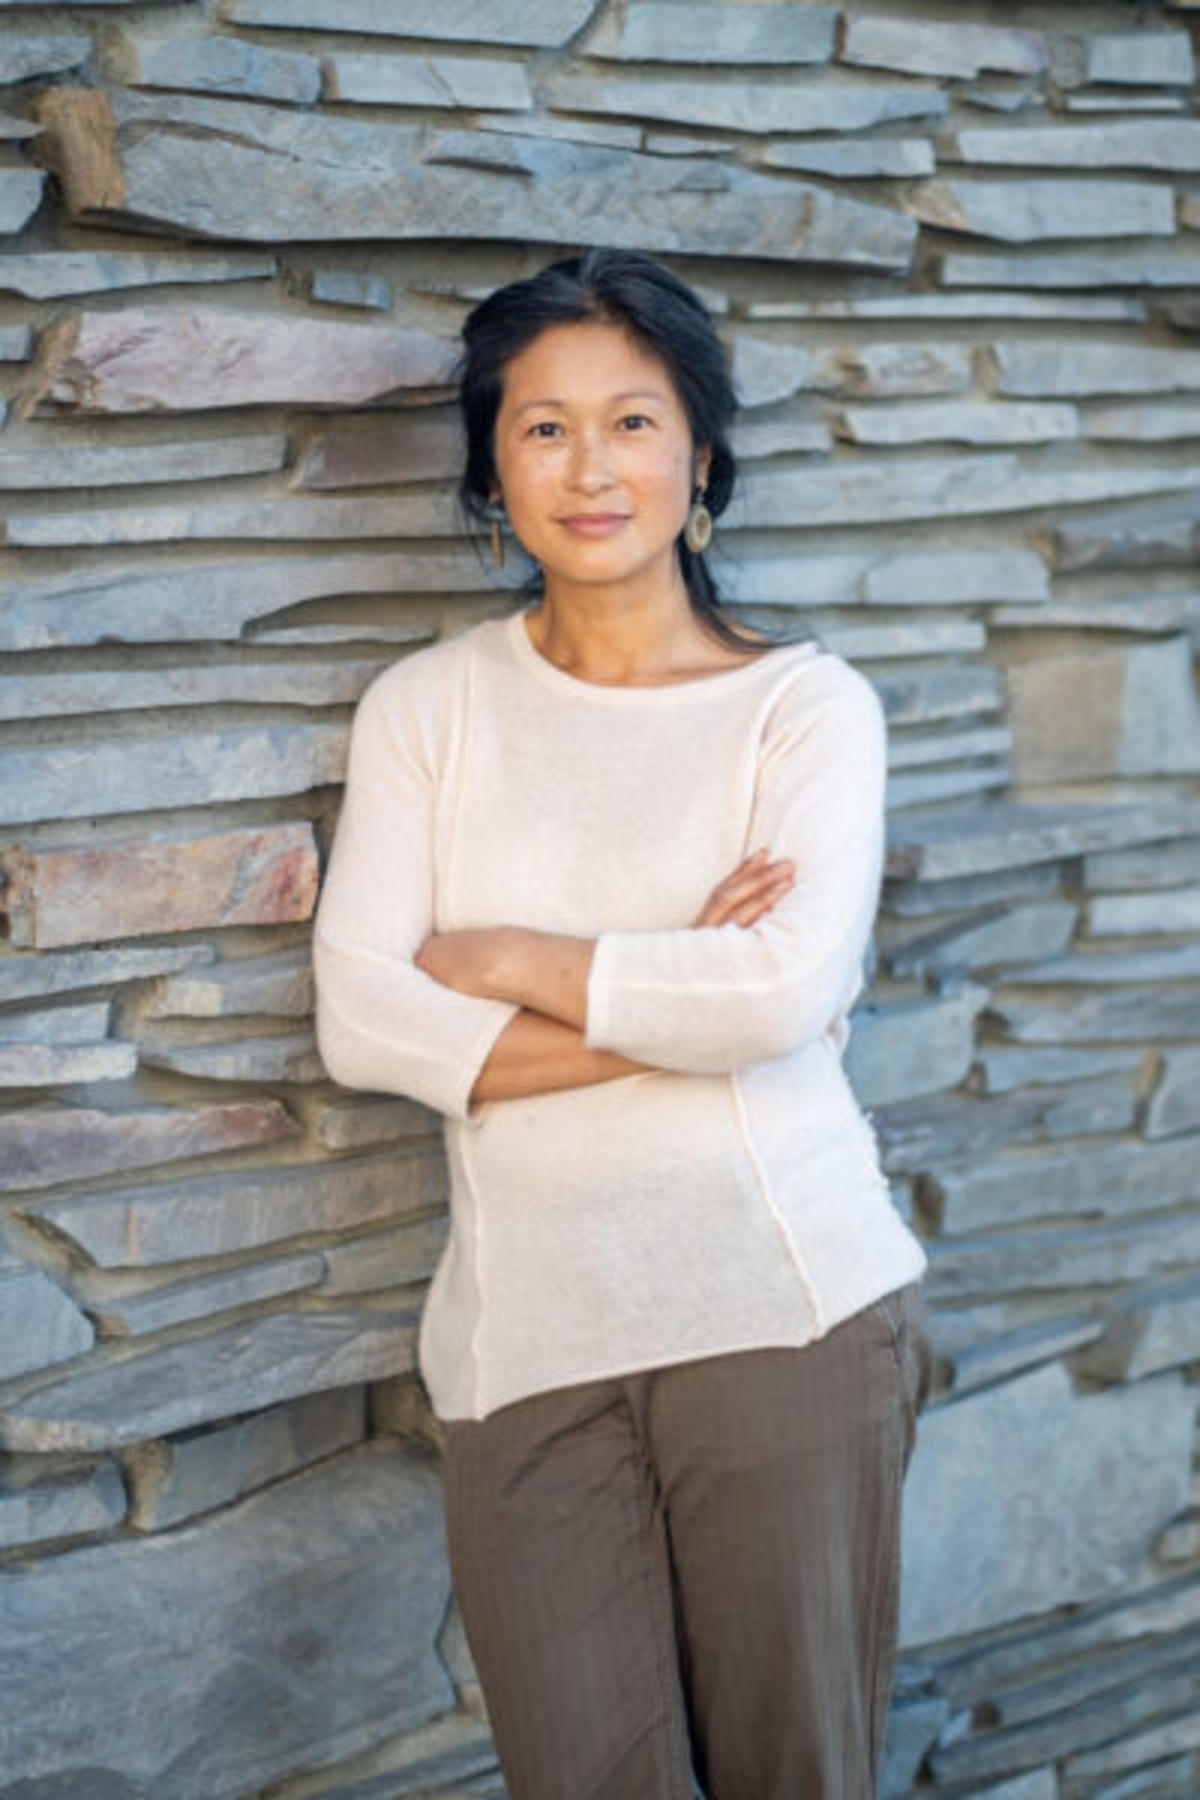 Linda Thai color portrait. Linda is a Vietnamese woman who is standing and leaning against a stone wall. Her arms are crossed in front of her and is smiling.